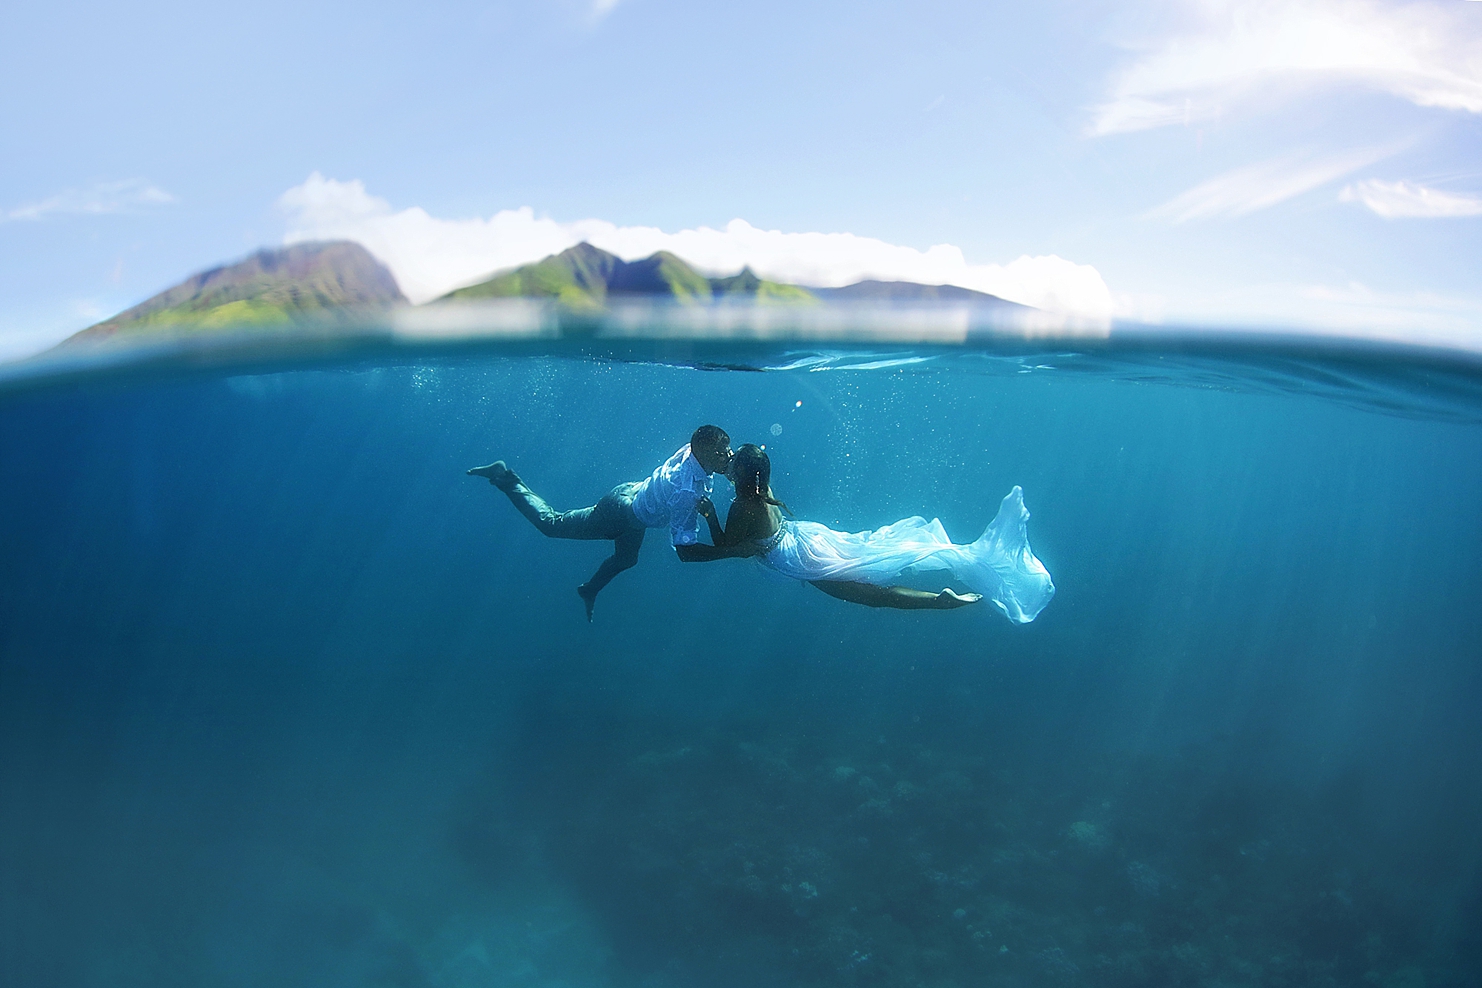 beach photoshoot ideas hawaii trash the dress portrait featuring couple in wedding attire kissing underwater in maui by love and water photography